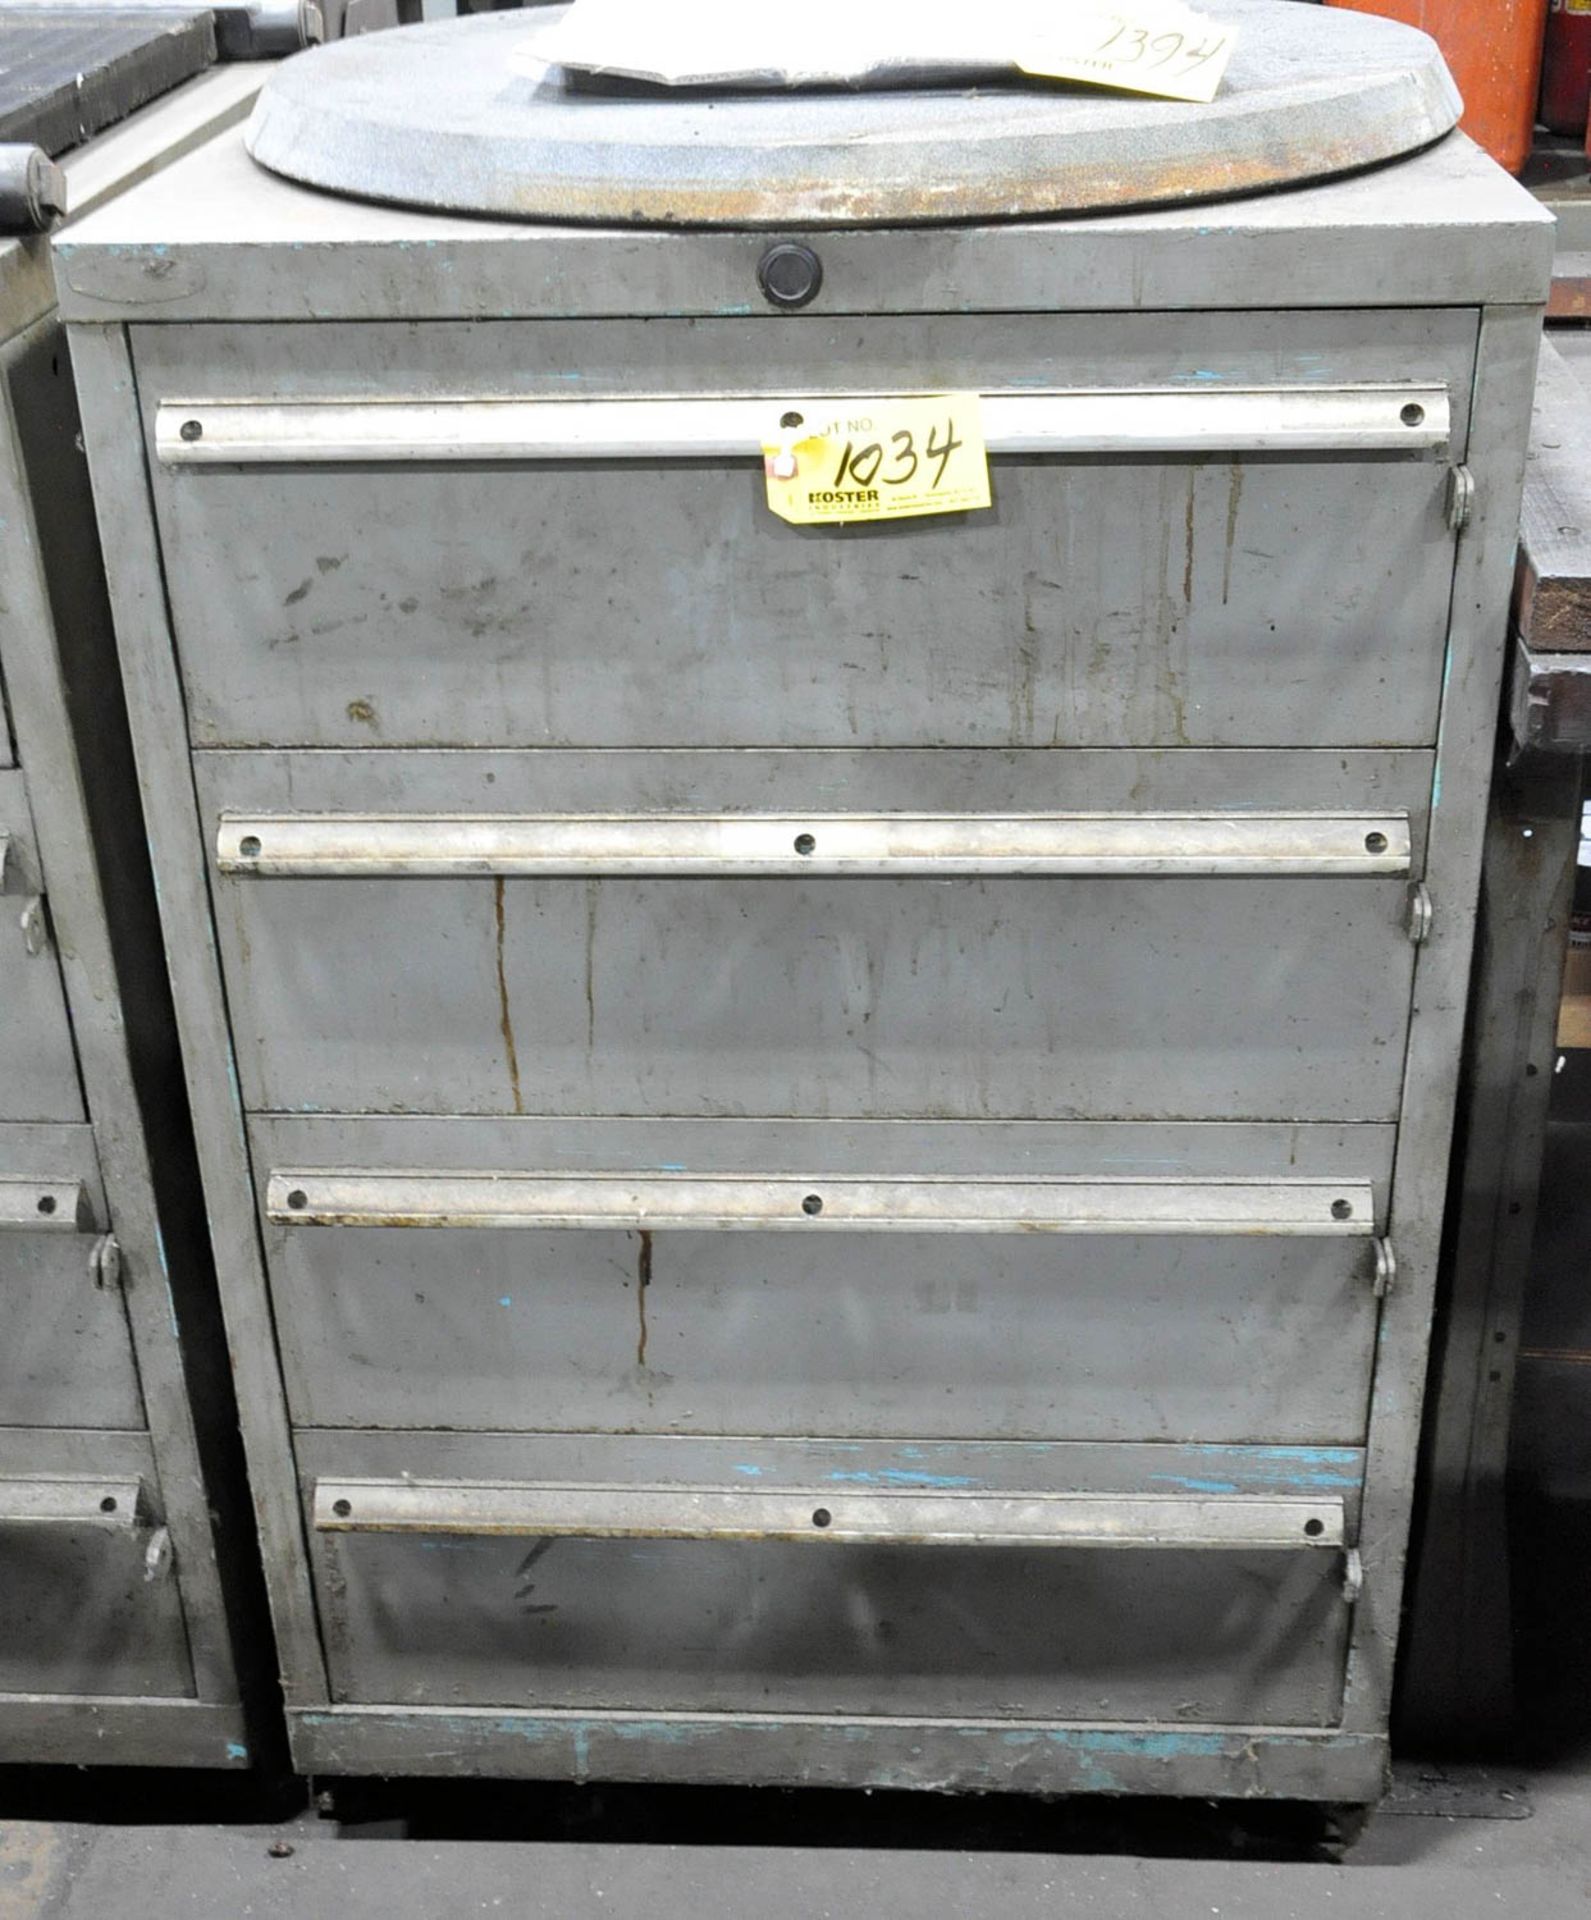 4-DRAWER TOOLING CABINET, (CONTENTS NOT INCLUDED), (TOOL ROOM-TIFFIN)